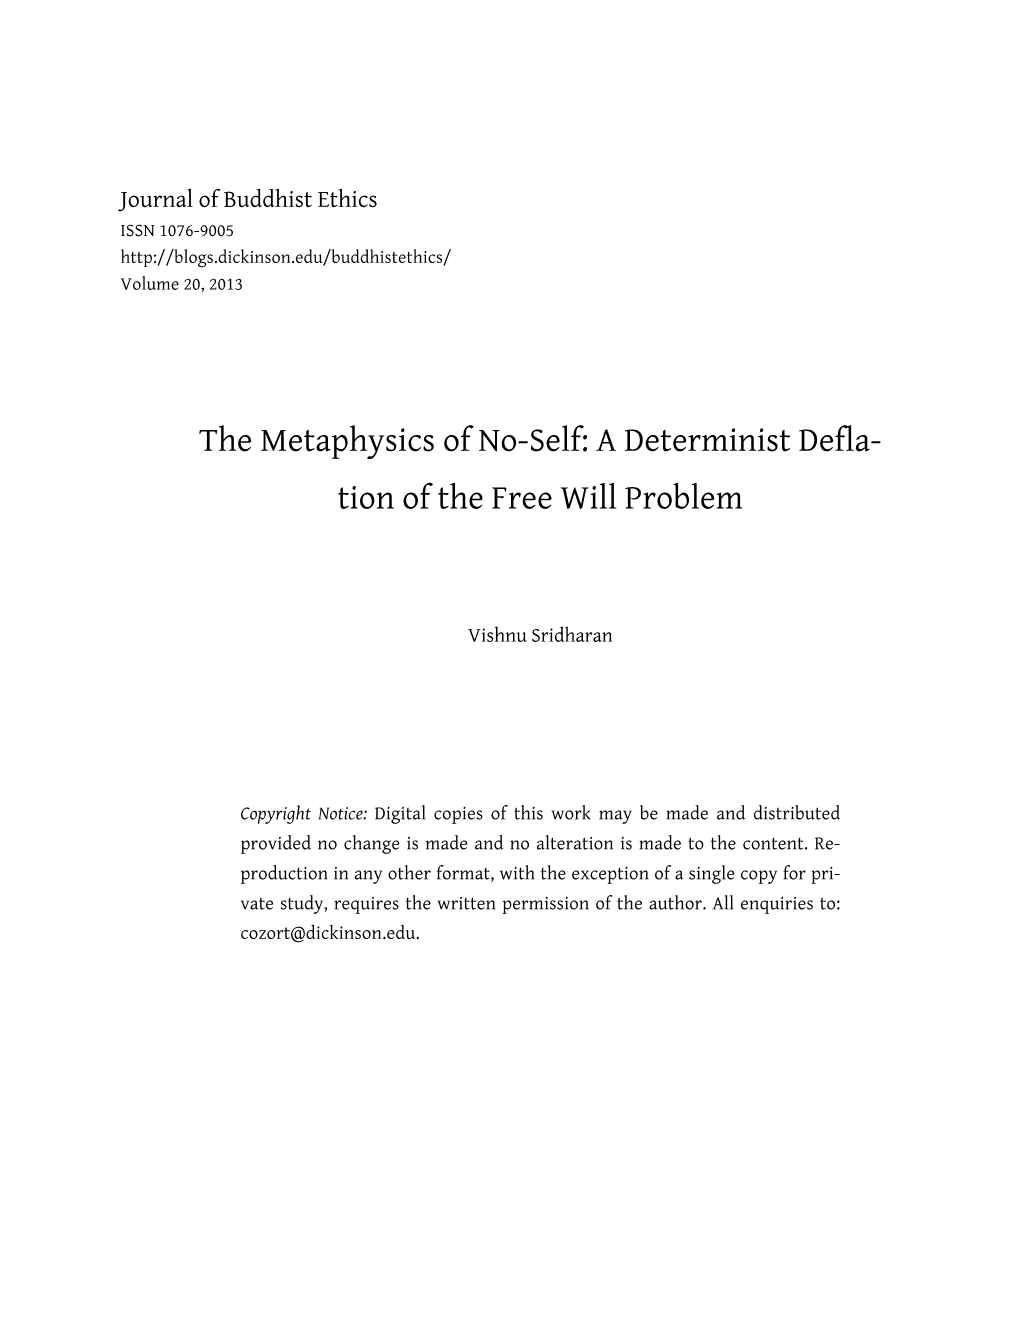 The Metaphysics of No-Self: a Determinist Defla- Tion of the Free Will Problem